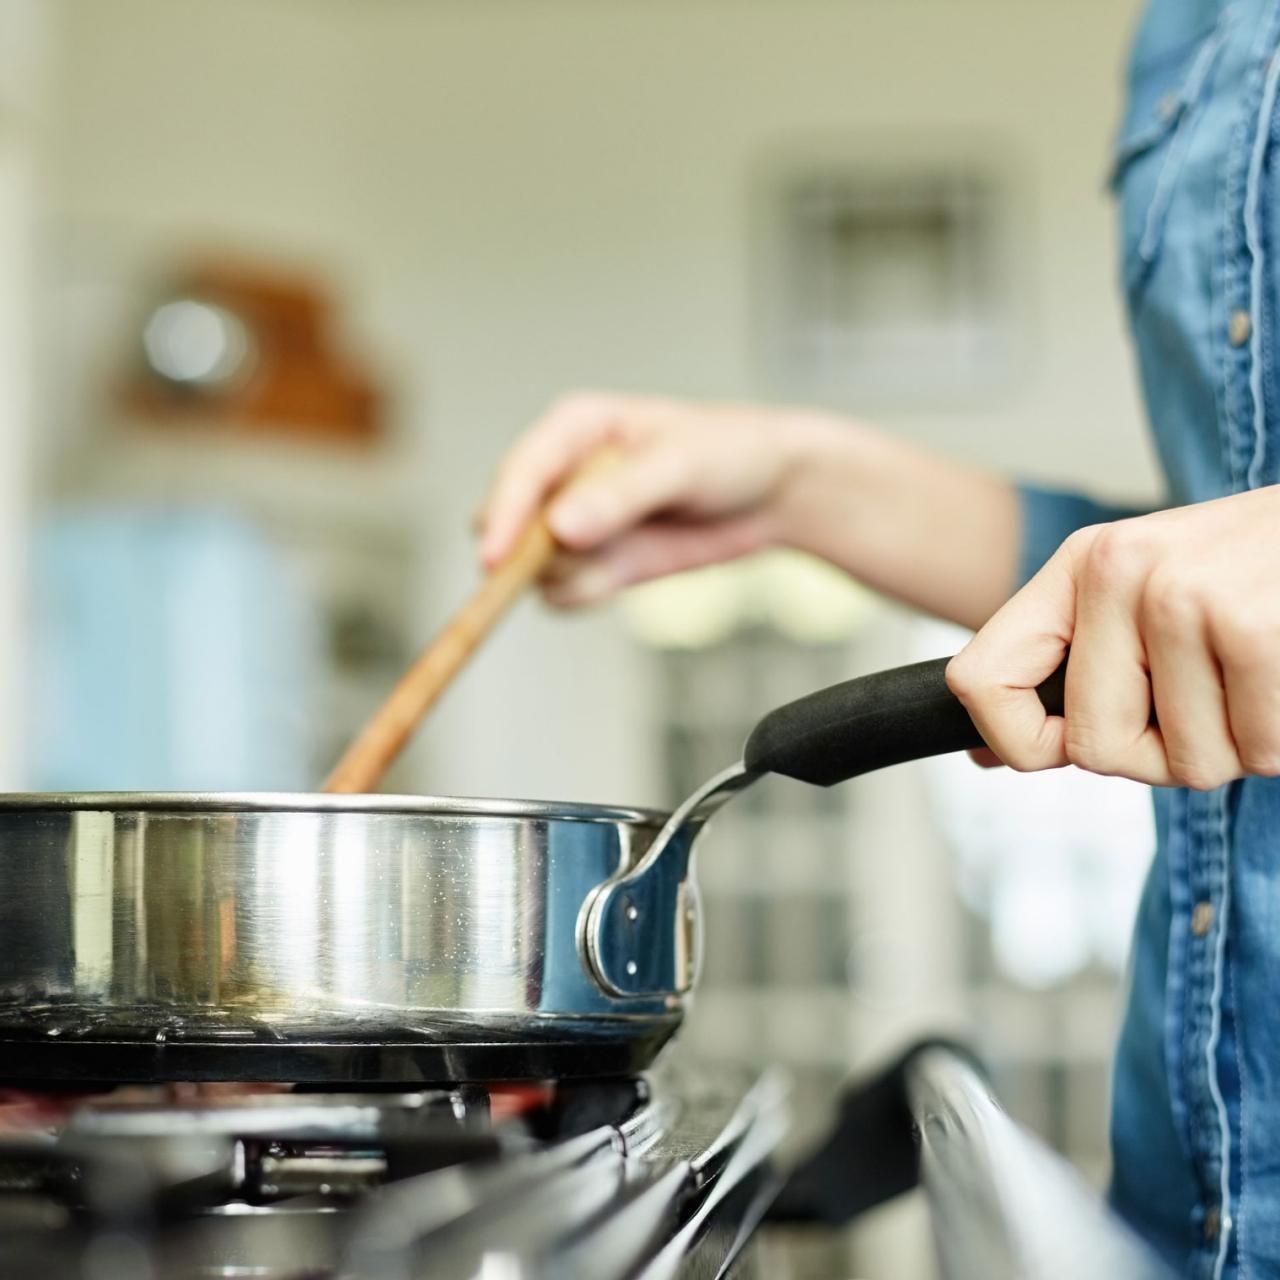 How to Smoke Foods on Your Stovetop Using Kitchen Gear You Already